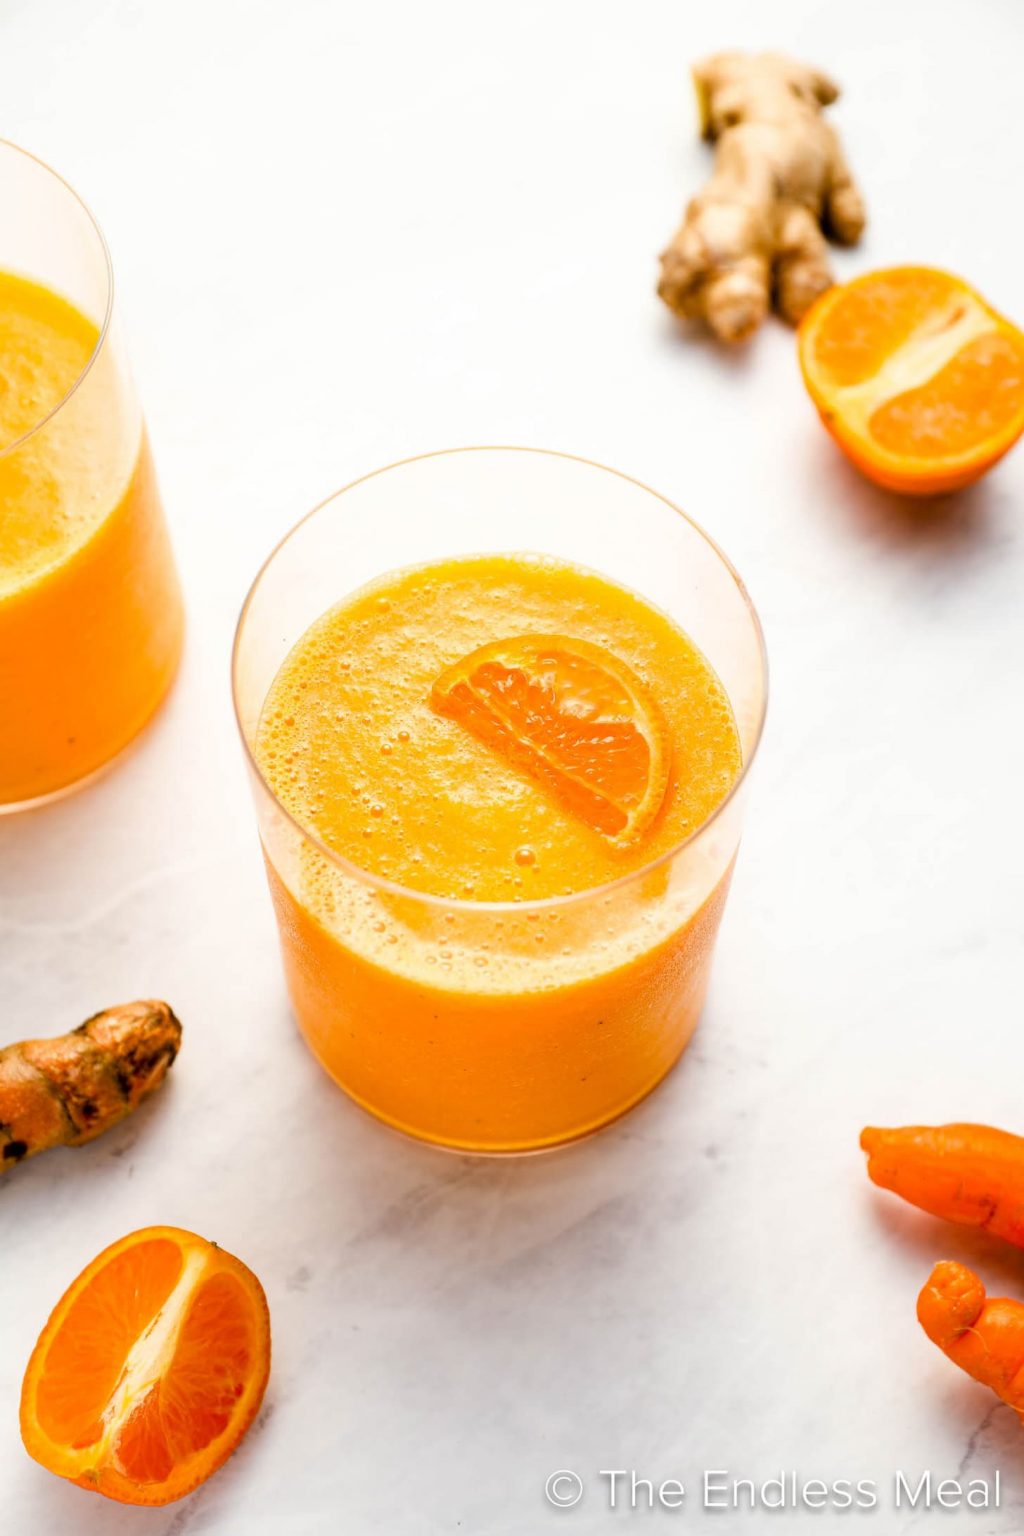 A Turmeric Smoothie in a cup for breakfast